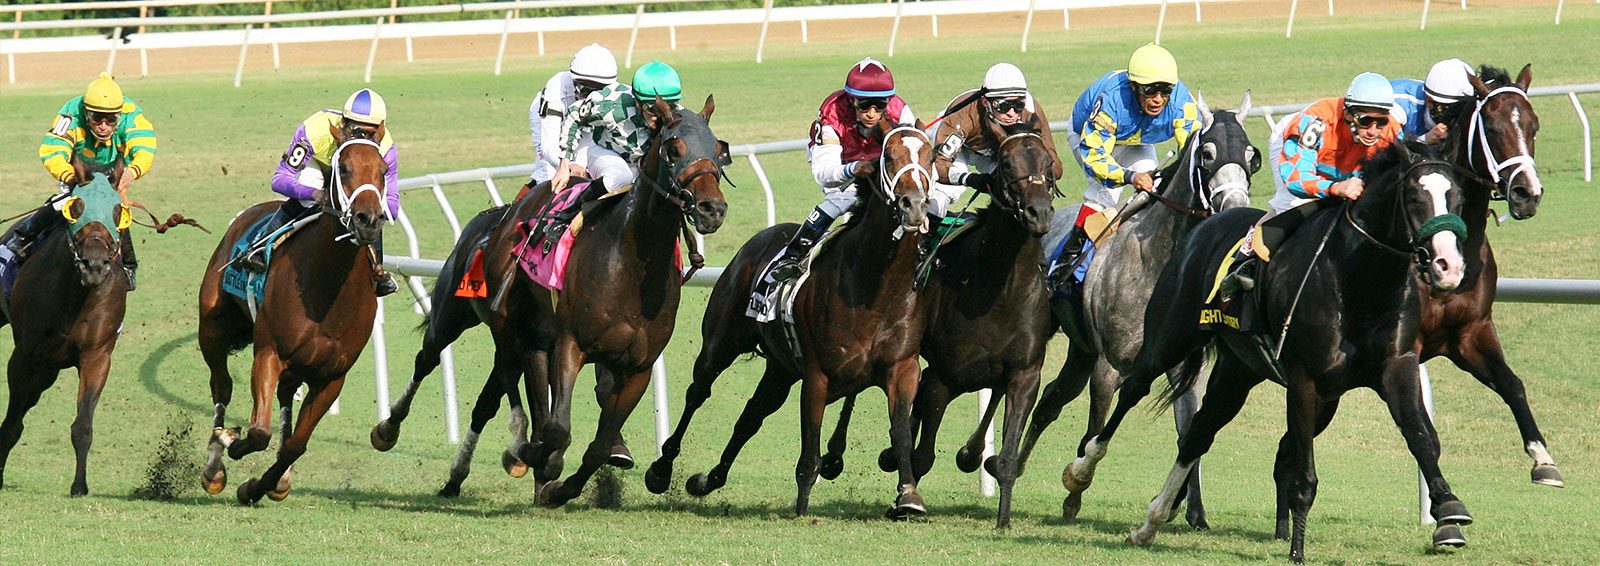 Horse Racing Picture 102519